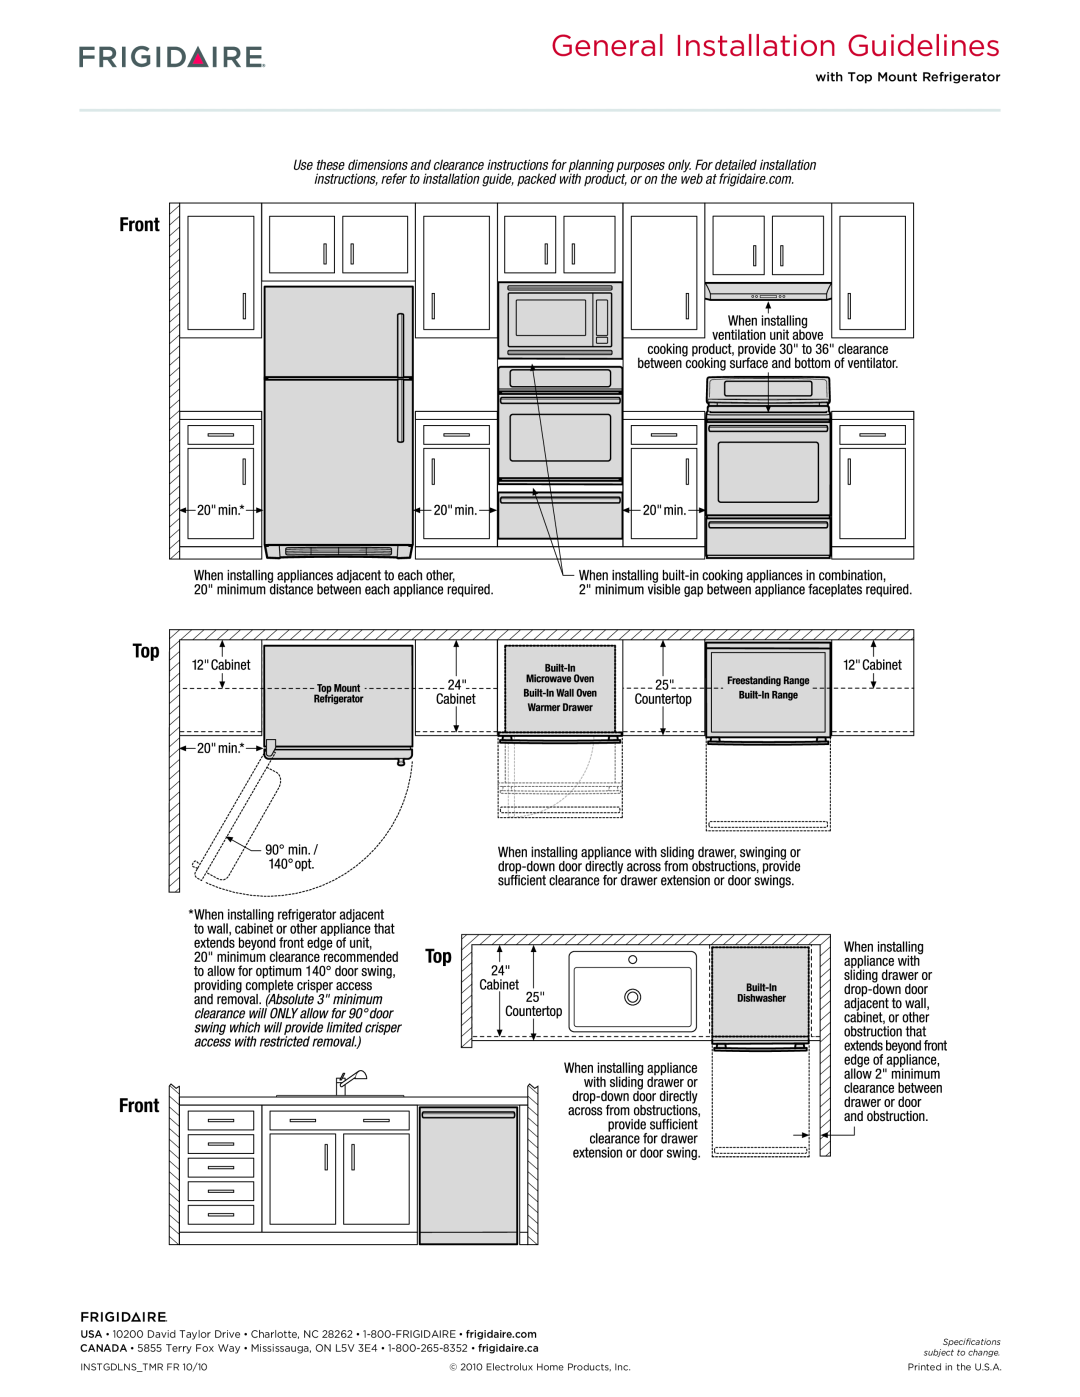 Frigidaire FPDS3085K F dimensions General Installation Guidelines, Top Front, with Top Mount Refrigerator 